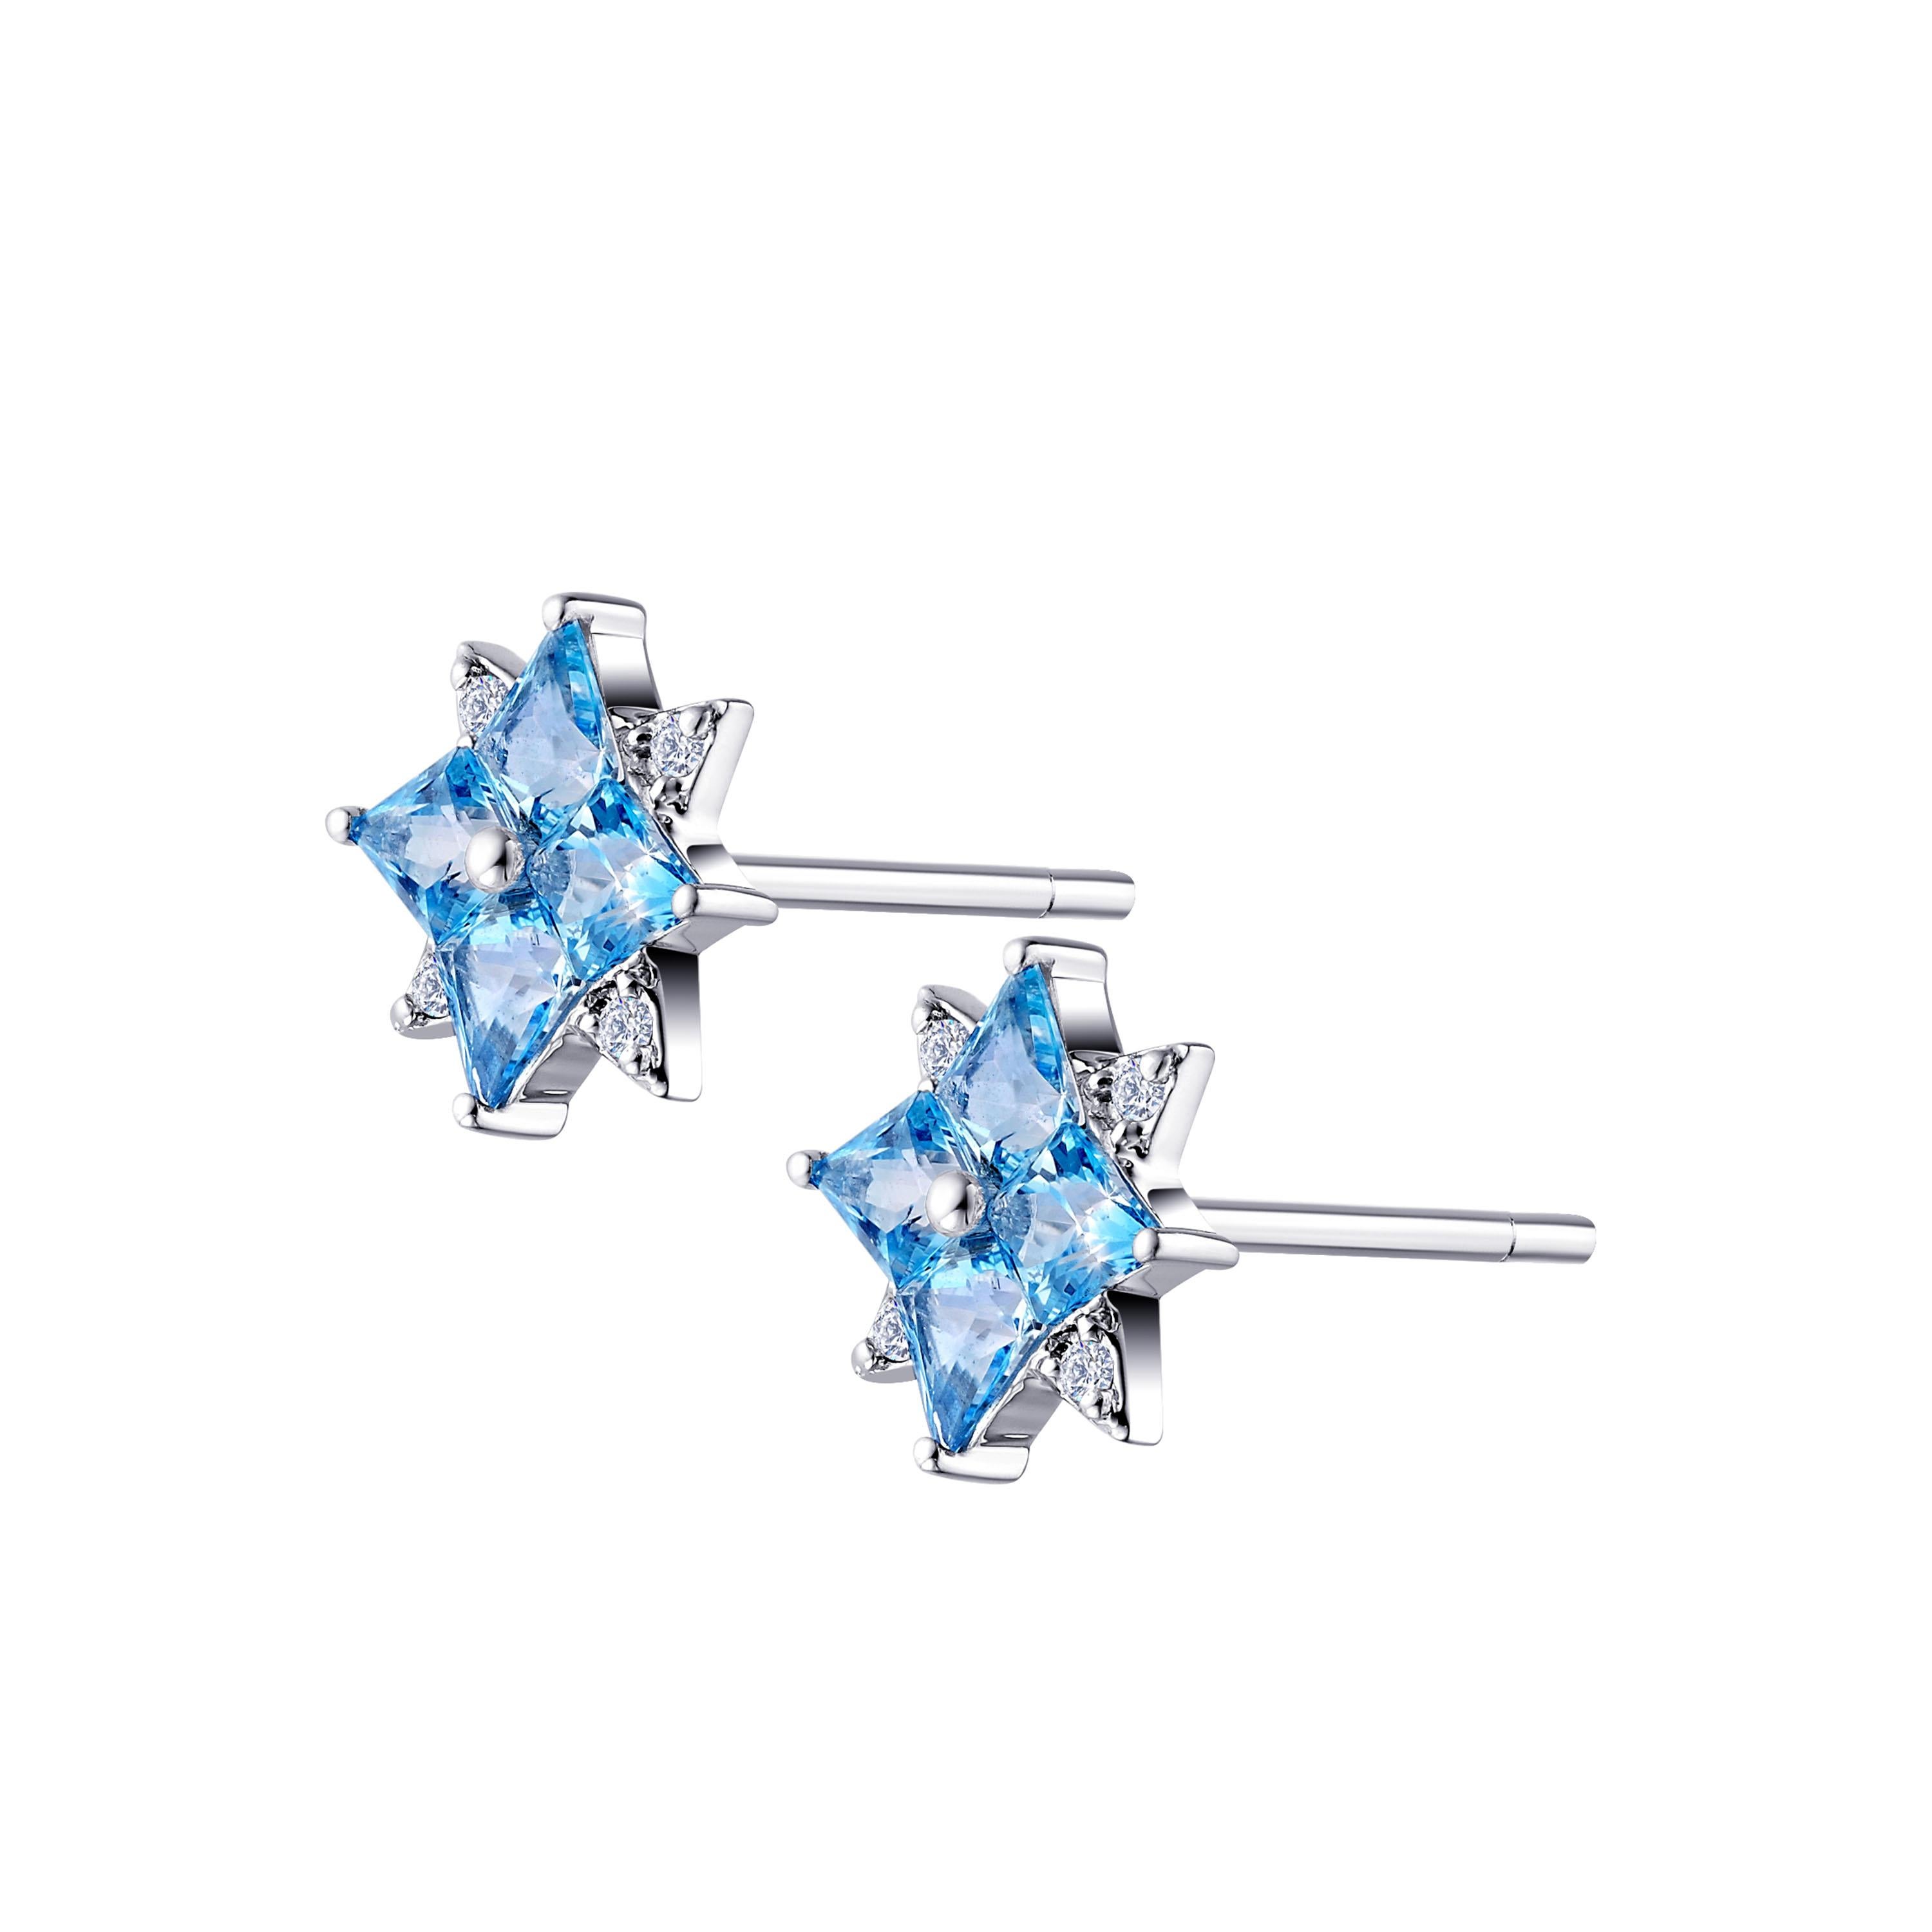 Description:
Star of Love Mini Star stud earrings with 0.6ct blue topazes and white cubic zirconia, set in white rhodium plate on sterling silver.

Inspiration:
The Star of Love series is inspired by the Polaris – the brightest star of the